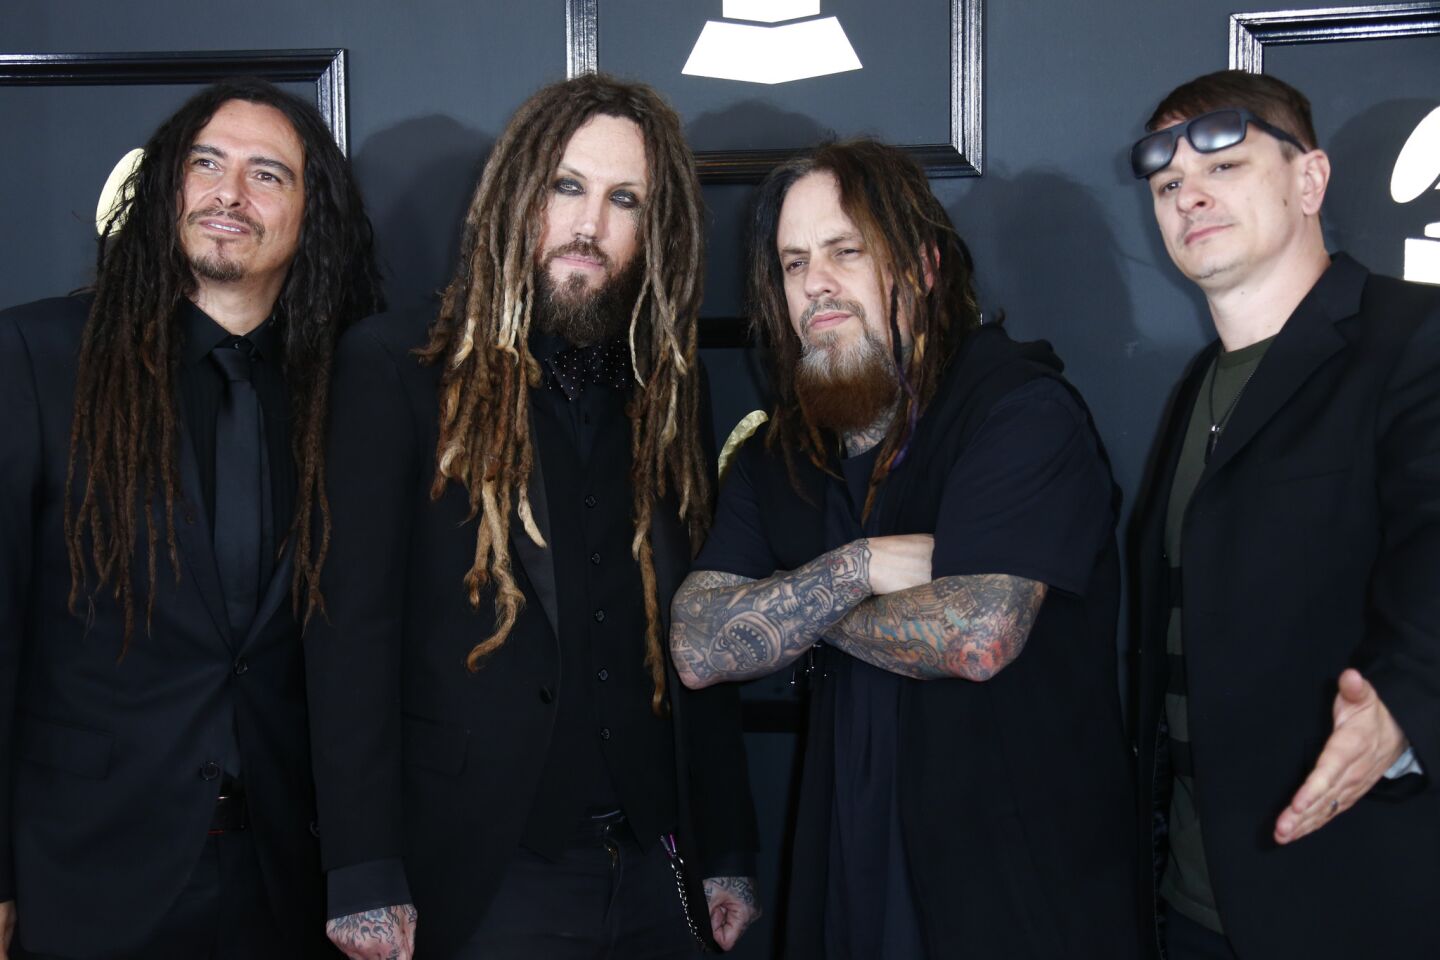 The band Korn arrives at the 59th Grammy Awards.